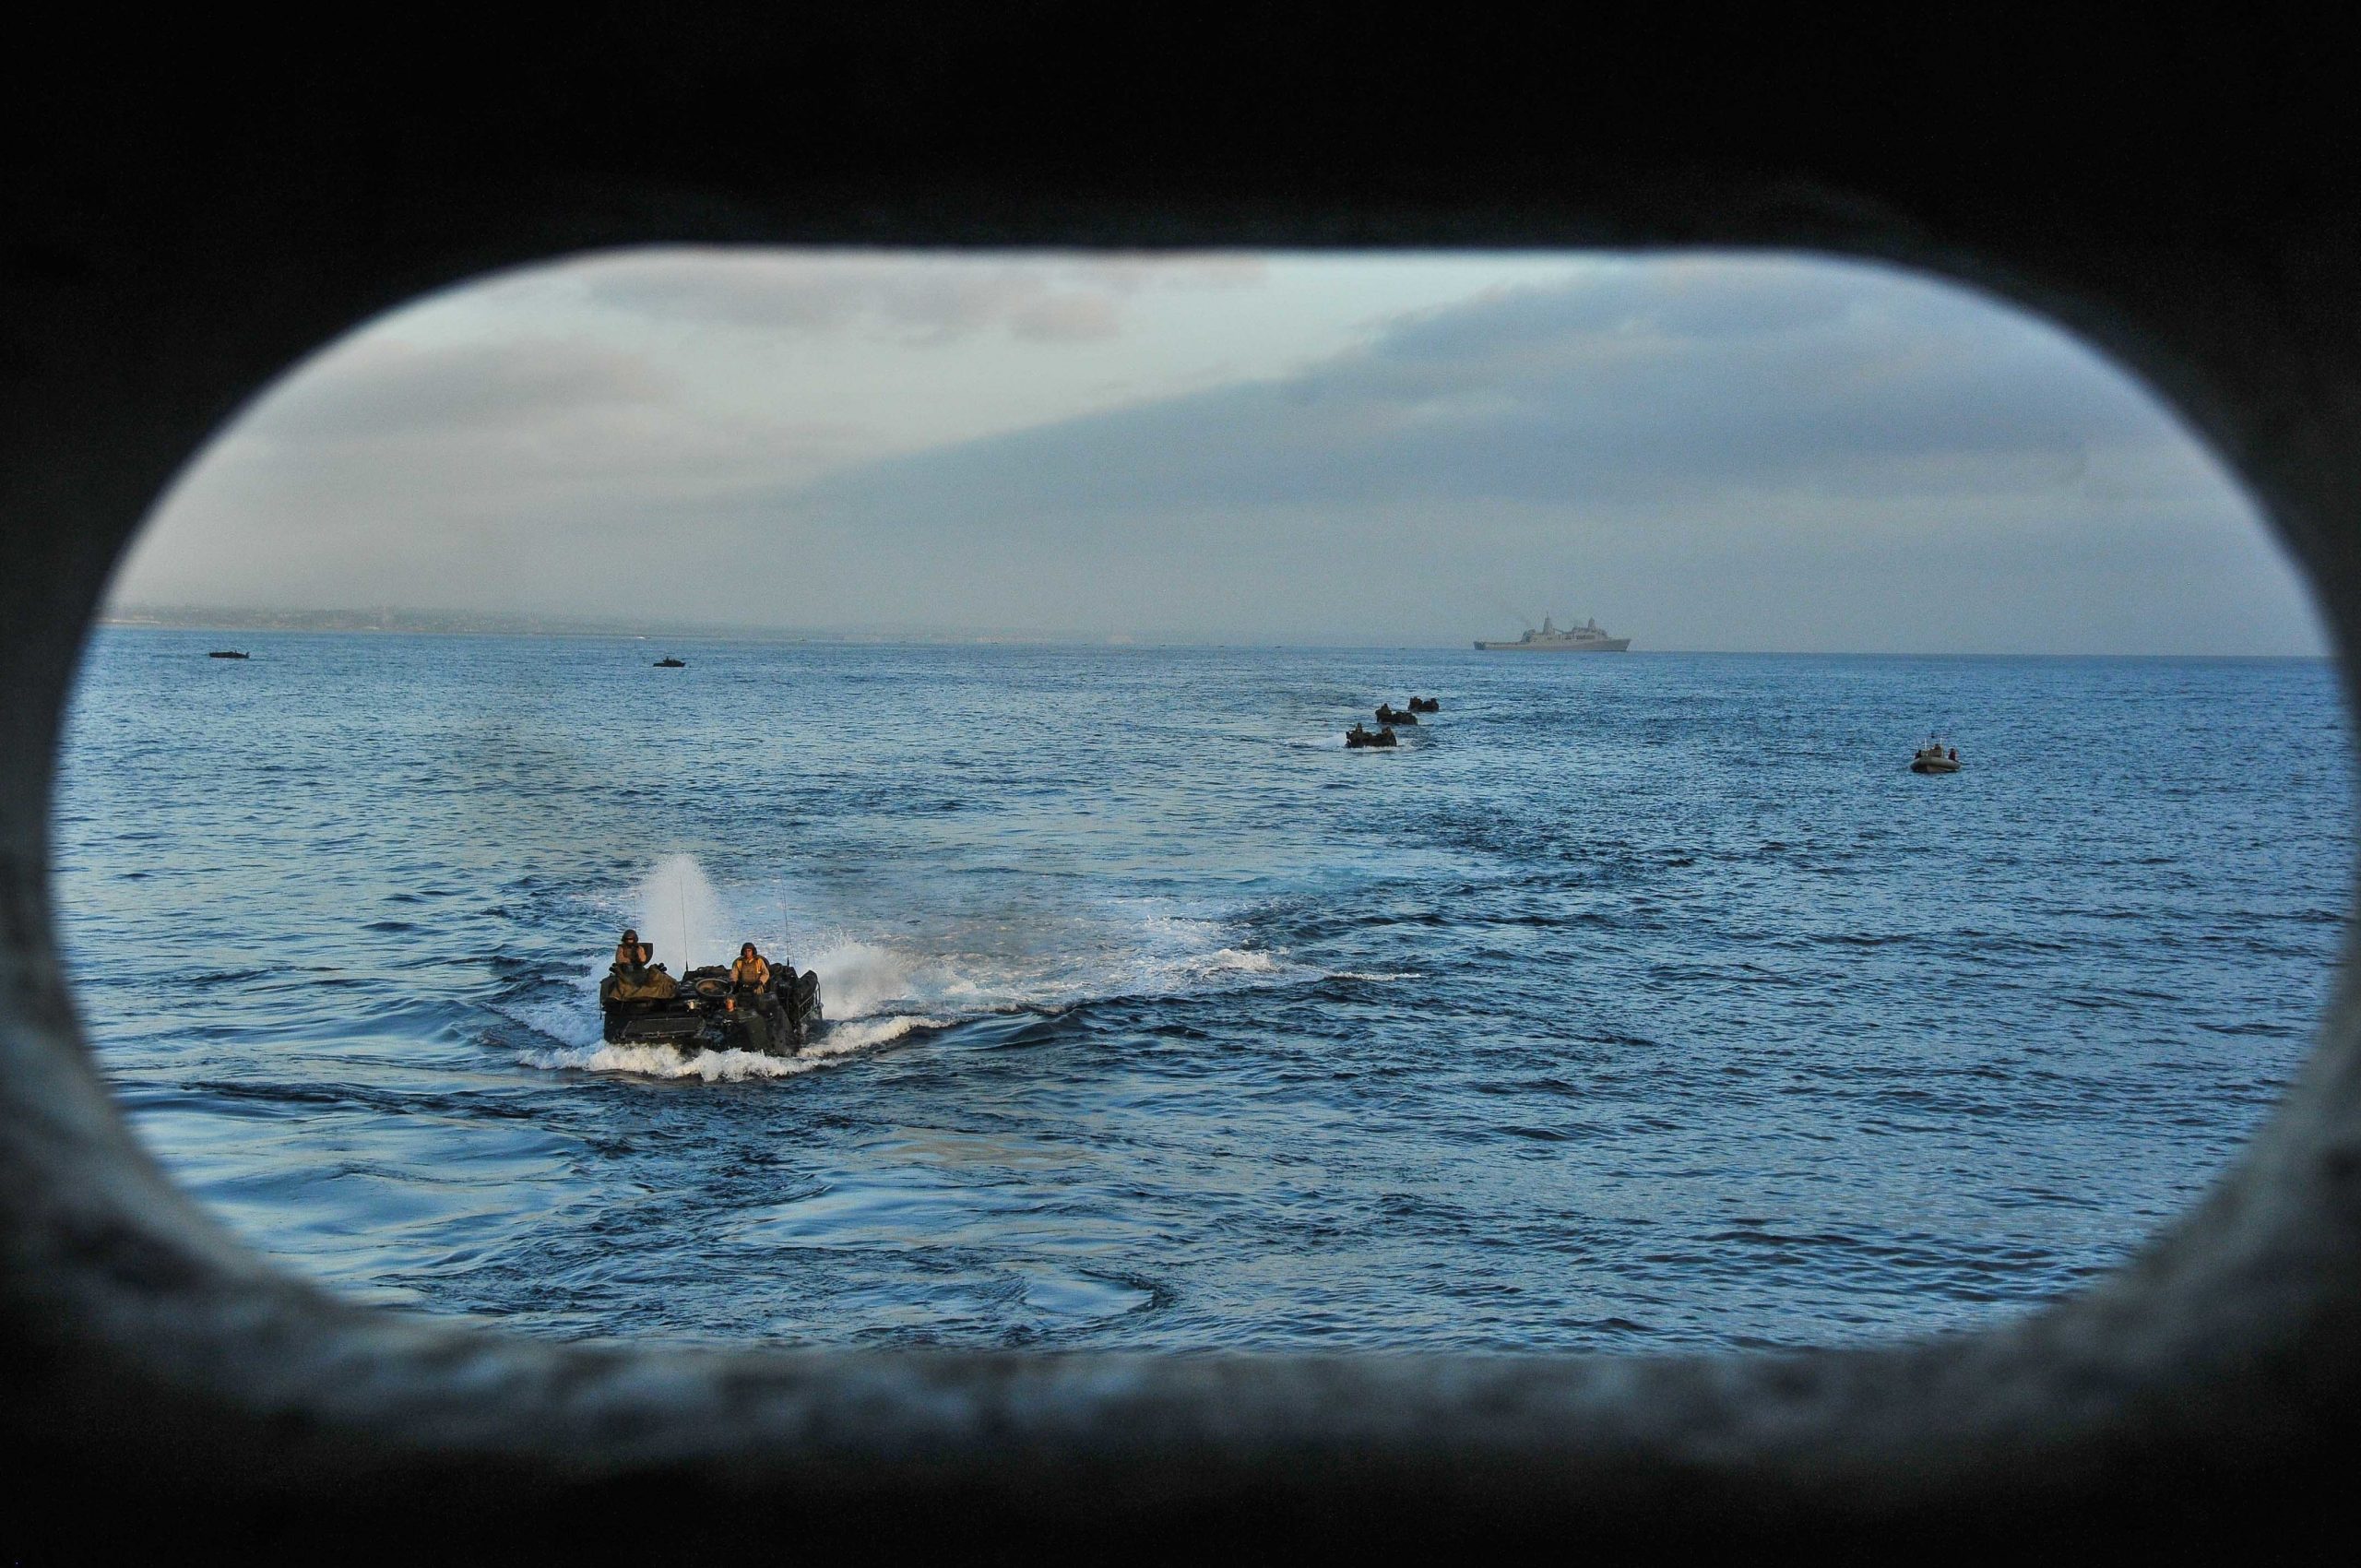 150831-N-WK391-032 PACIFIC OCEAN (August 31,2015) Amphibious assault vehicles prepare to enter the well deck of the amphibious transport dock ship USS New Orleans (LPD 18), during Exercise Dawn Blitz 2015 (DB-15). DB-15, being conducted from Aug. 31- Sept. 9, 2015 by Expeditionary Strike Group 3 (ESG-3) and 1st Marine Expeditionary Brigade (1stMEB), is a multinational training exercise between the U.S., Japan, Mexico and New Zealand which conducts live, simulated, and constructive operations to enhance each country’s ability to activate and deploy an Amphibious Task Force with speed and effectiveness in support of the full range of military operations as required by combatant commanders. (U.S. Navy photo by Mass Communications Specialist 3rd Class Brandon Cyr/Released)